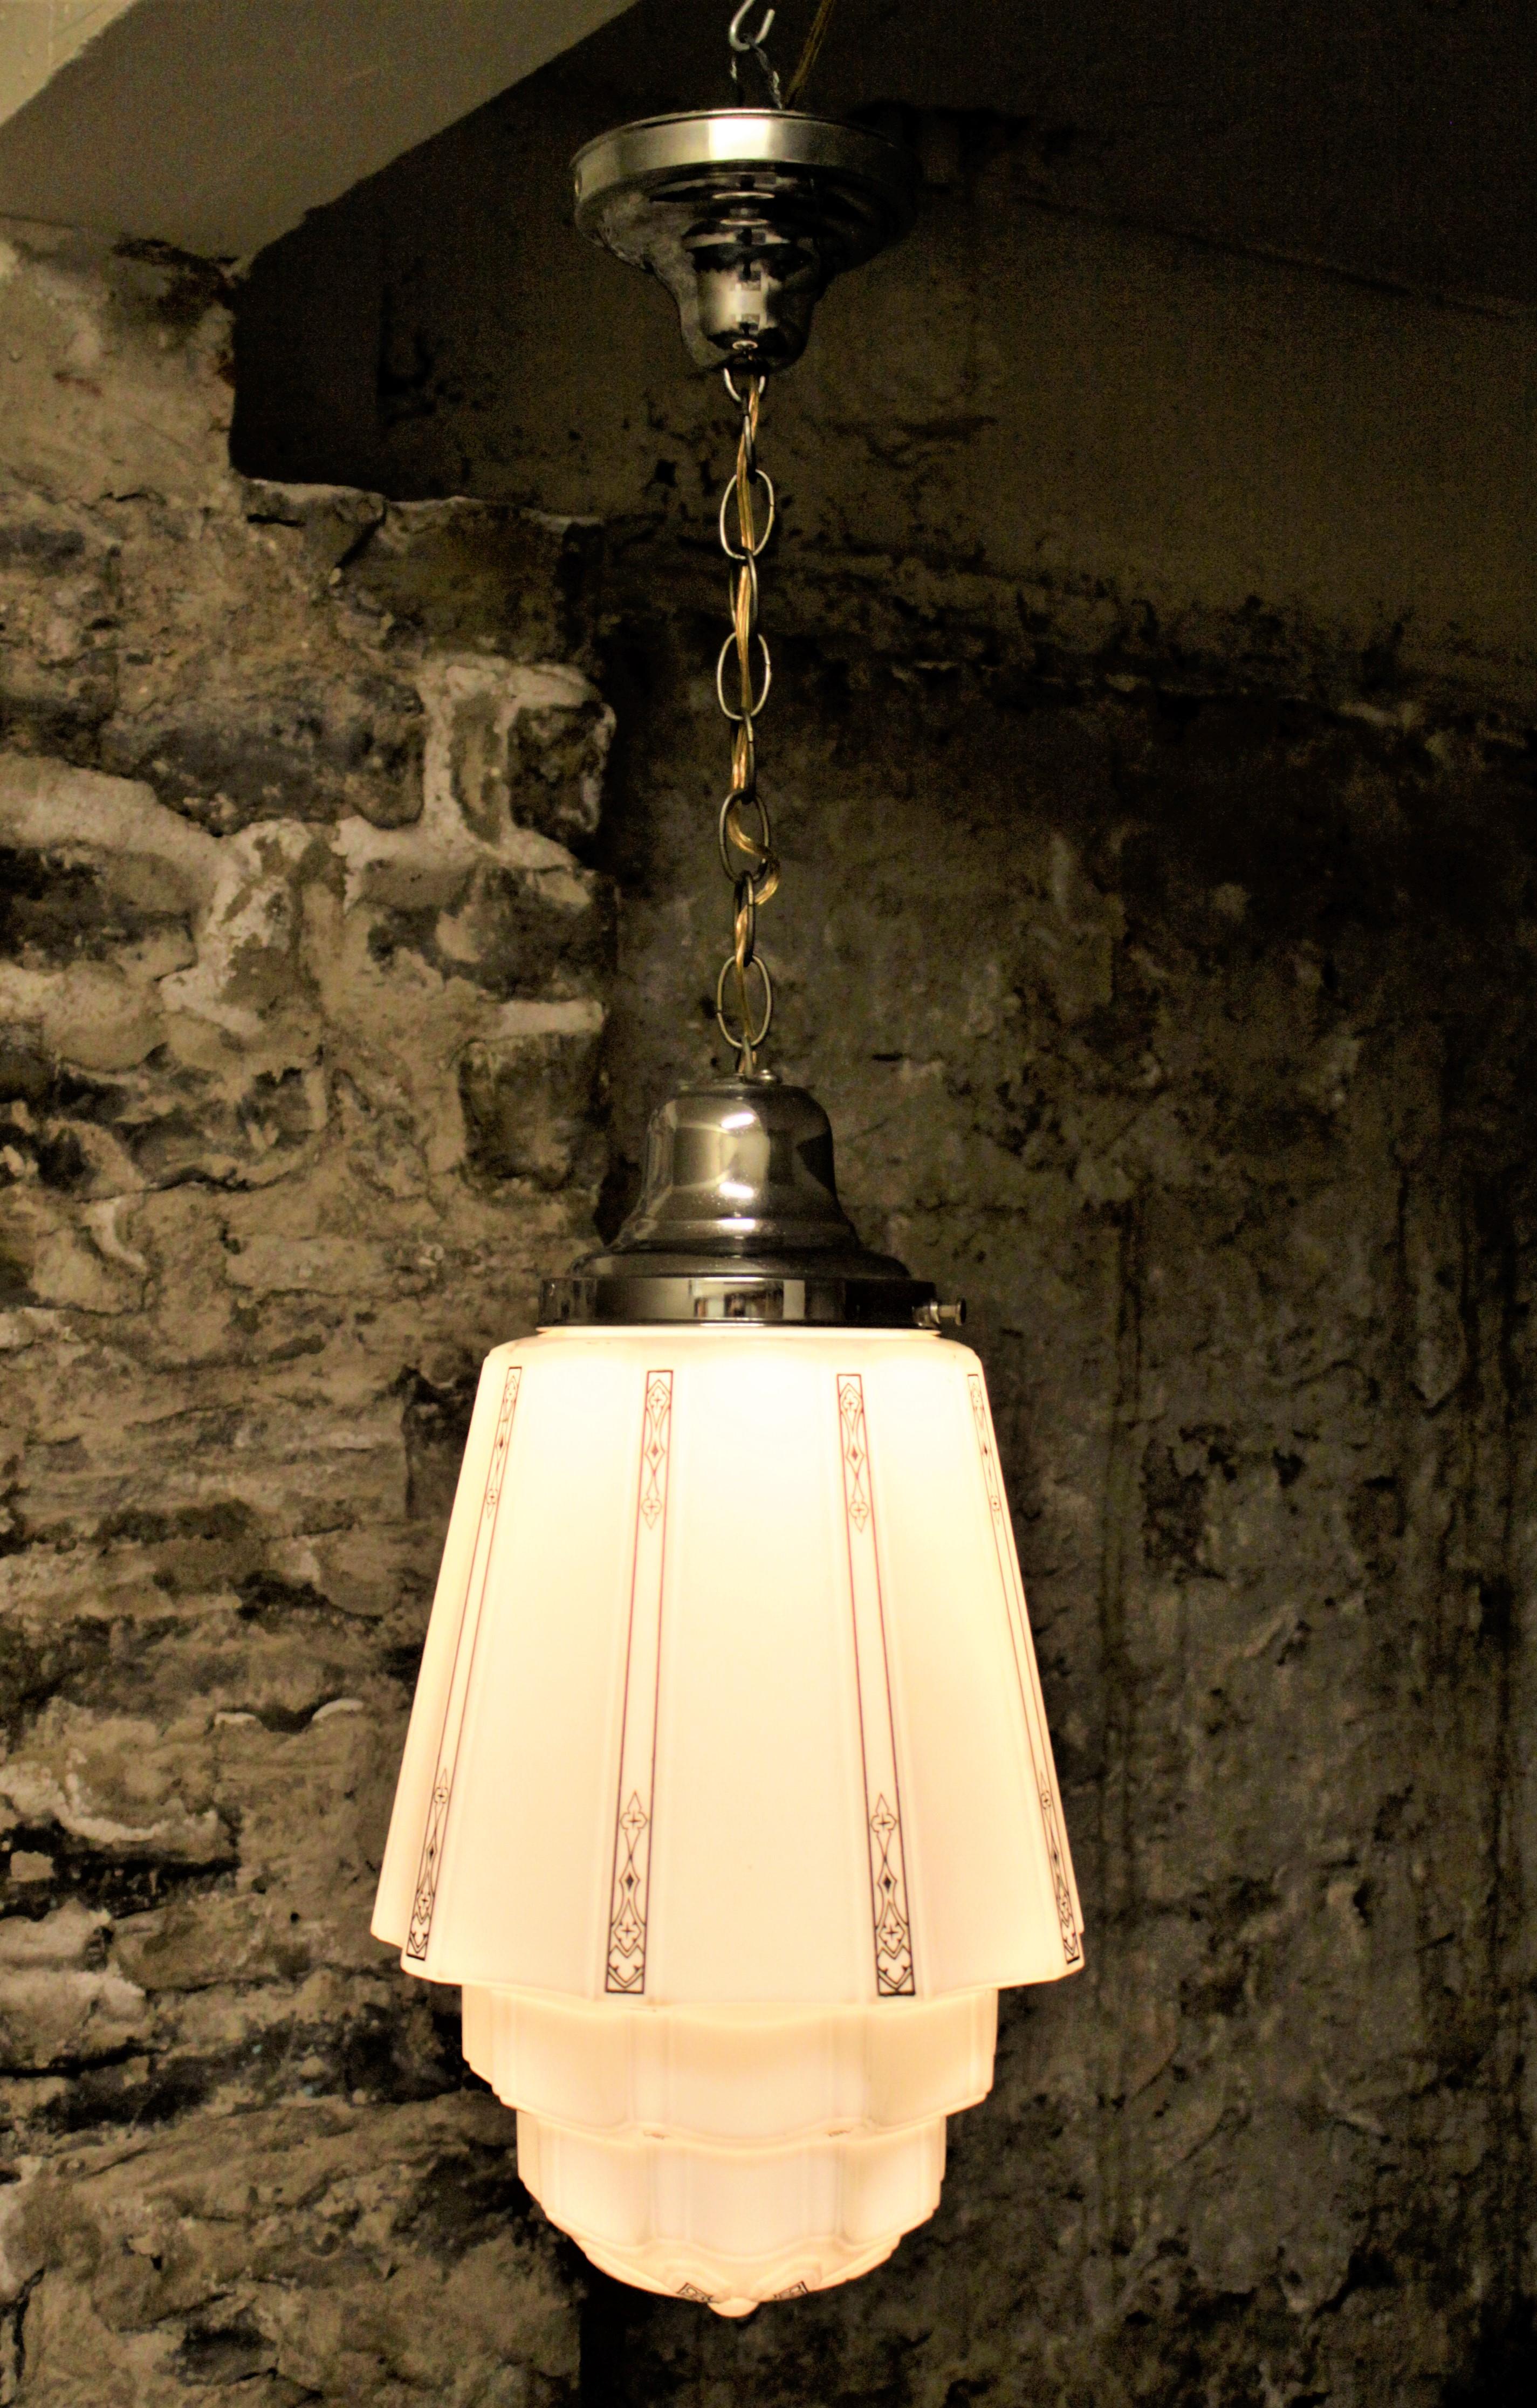 This Art Deco industrial pendant light is unsigned so the maker cannot be determined, but it is presumed to have been made in the United States in the early 1930s. The milk glass shade is done in a stepped, or 'Skyscraper' style with black geometric